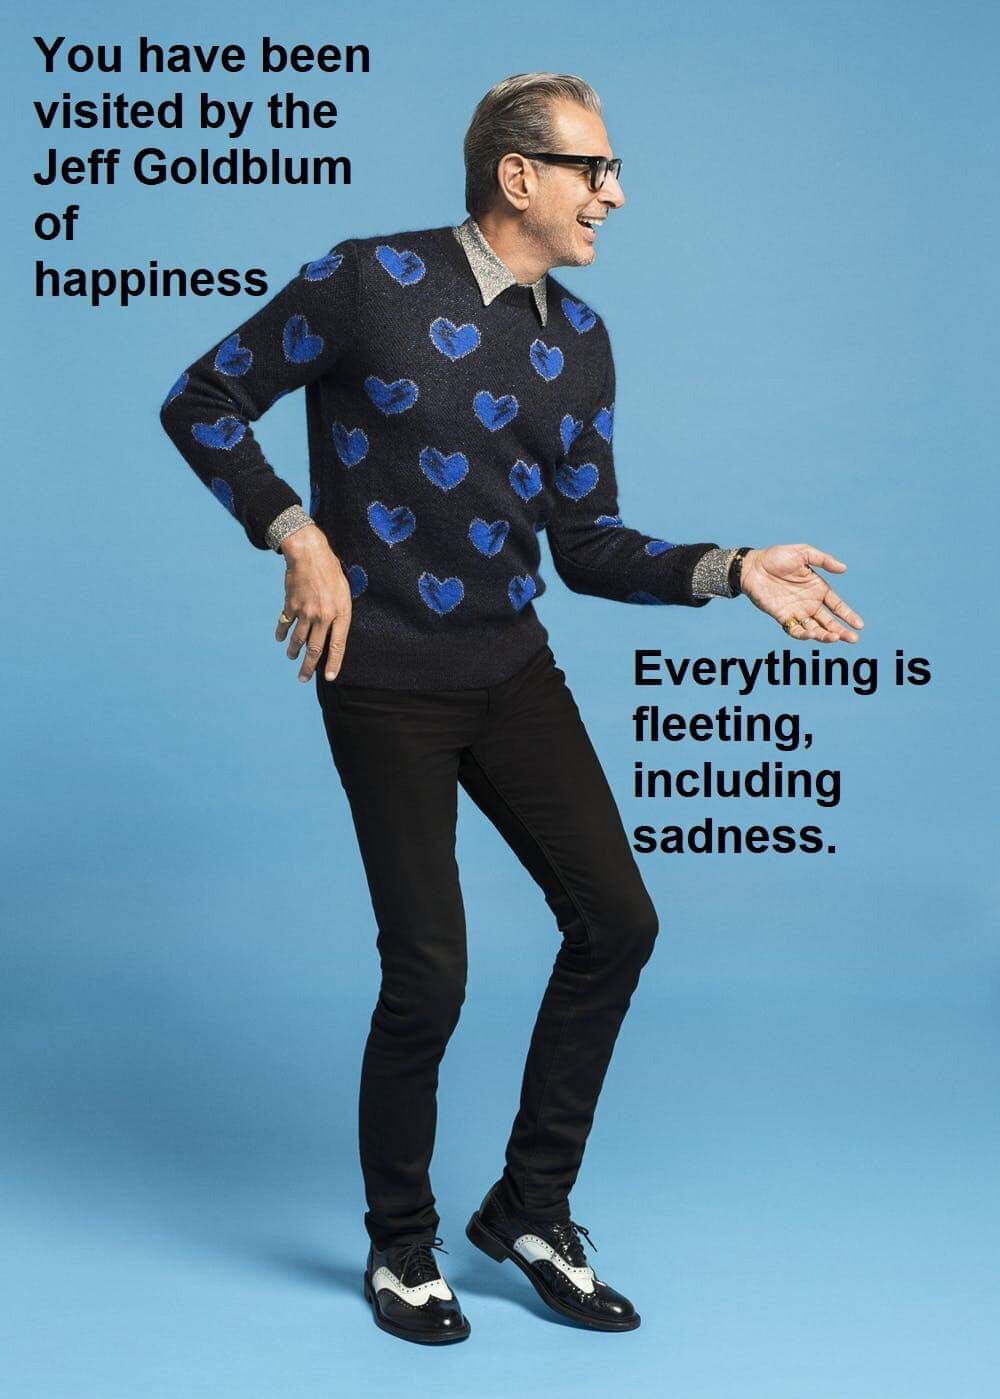 best jeff goldblum memes - You have been visited by the Jeff Goldblum of happiness Everything is fleeting, including sadness.